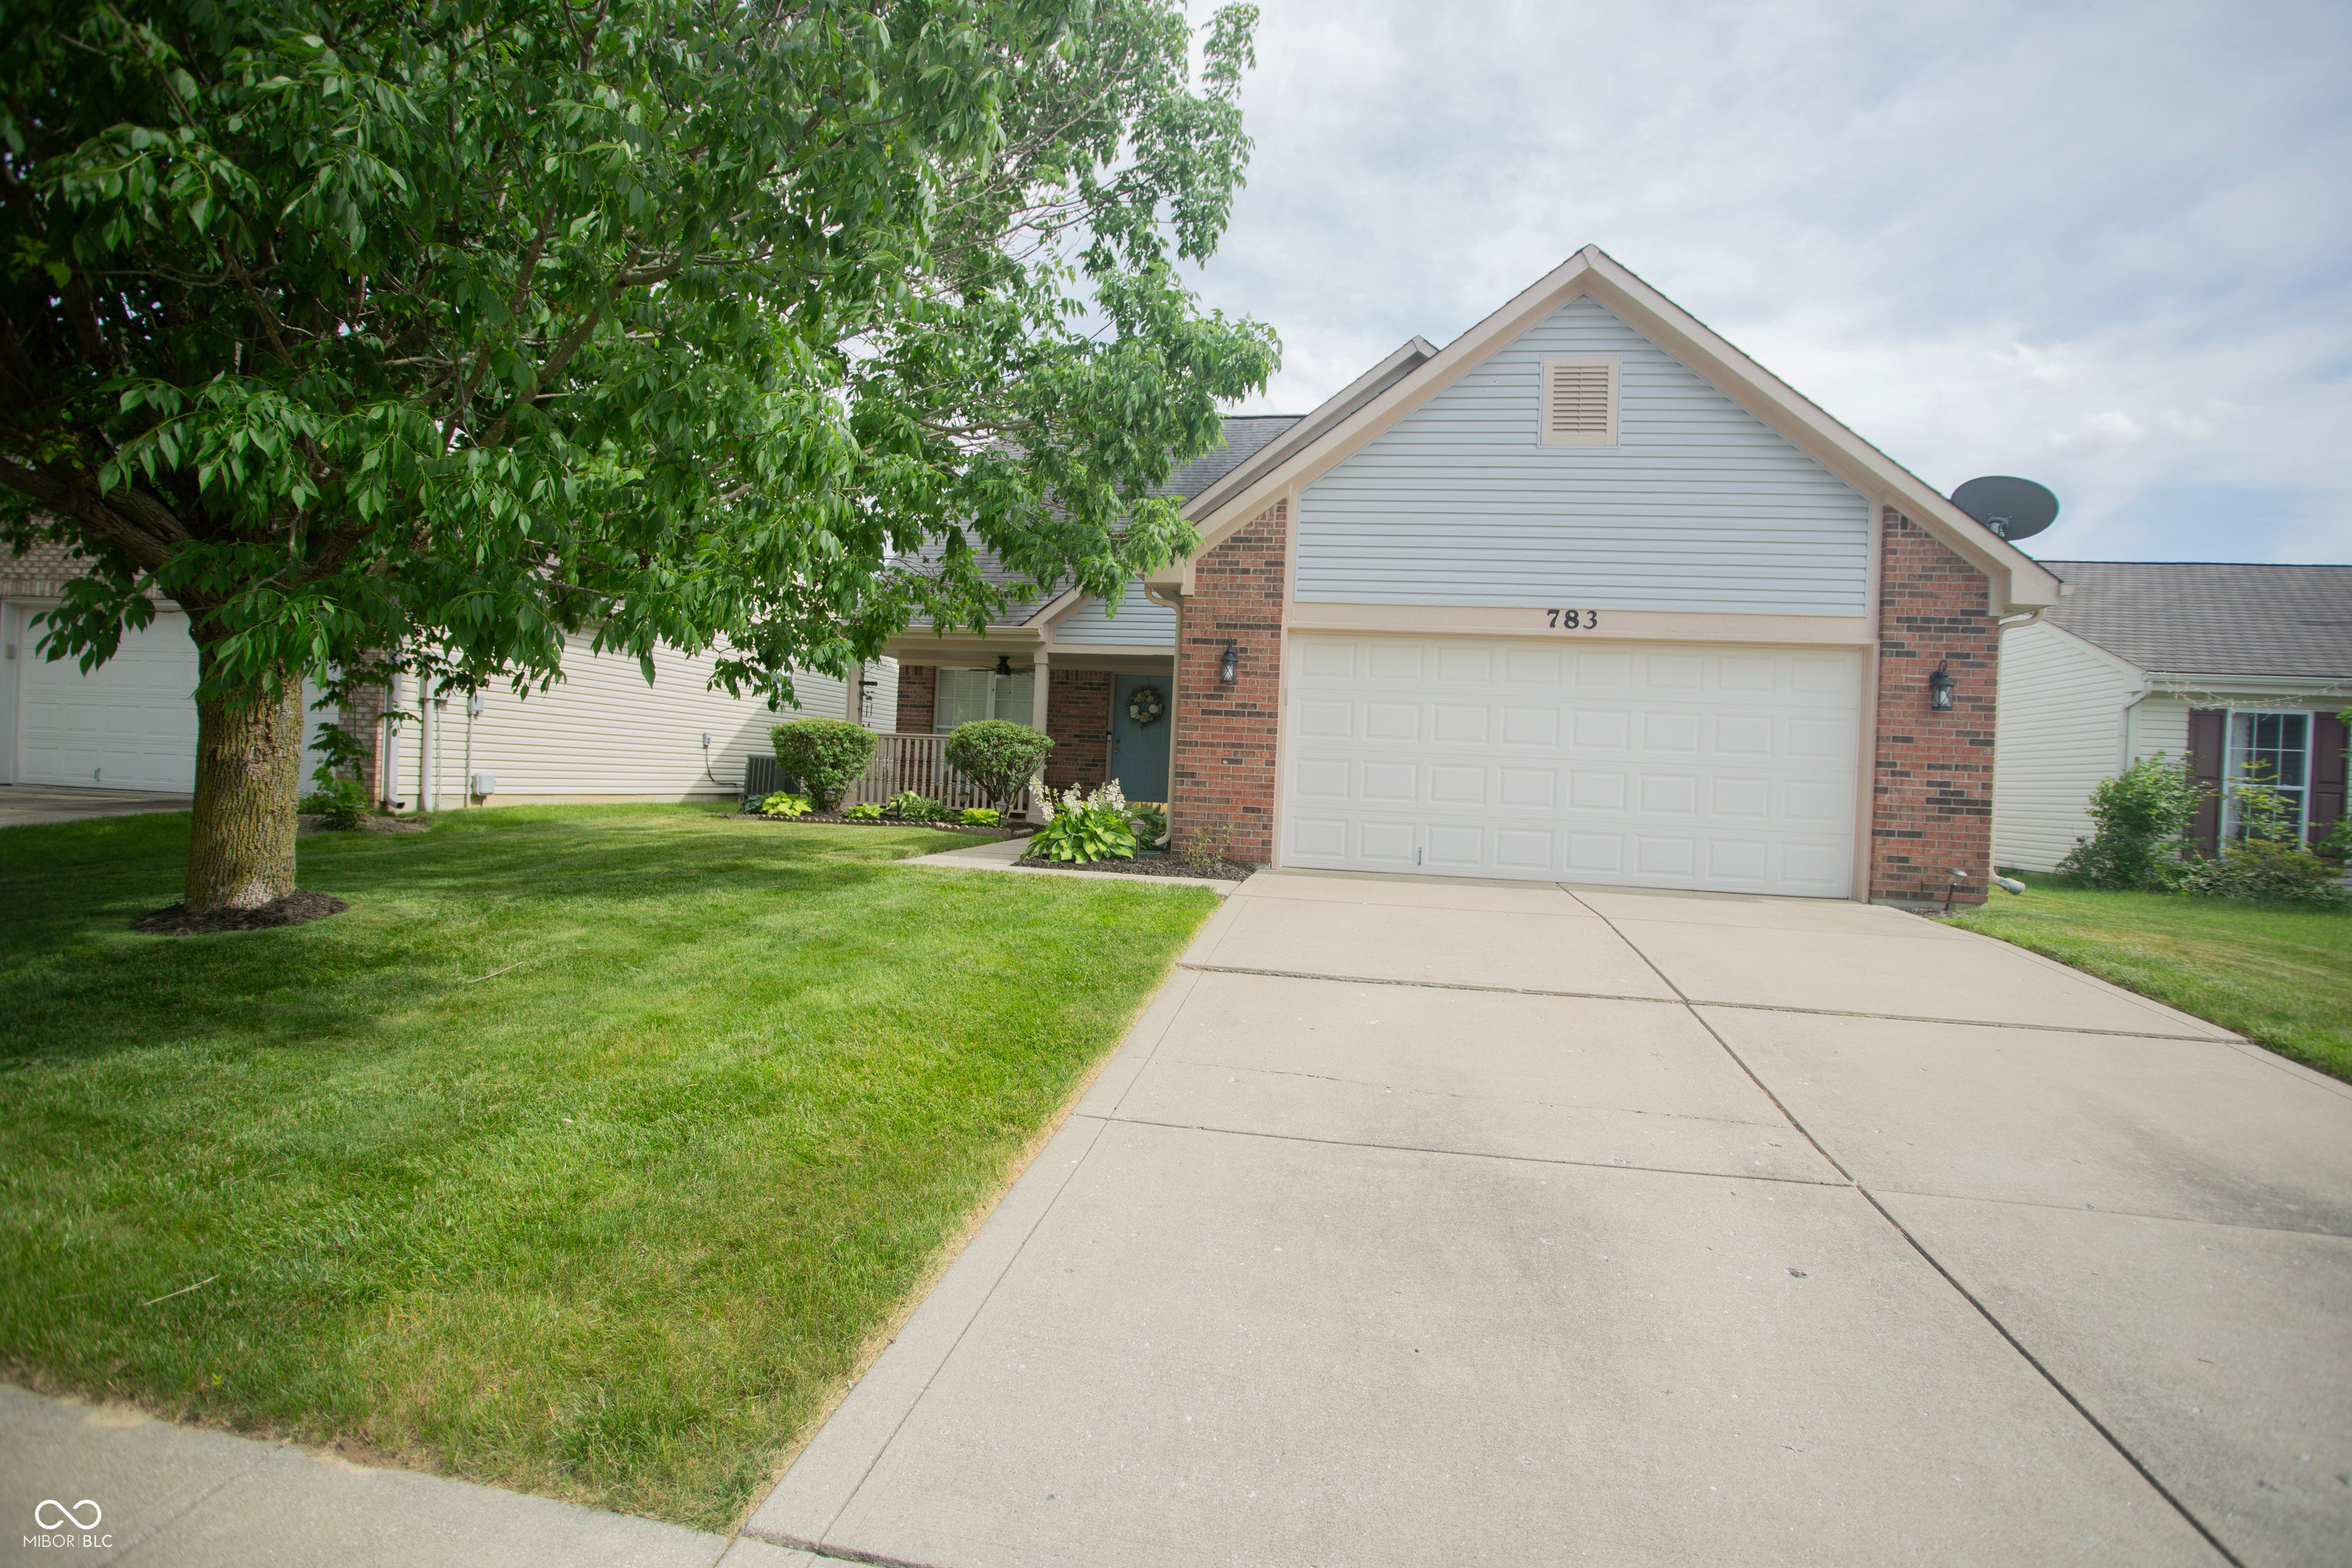 Photo of 783 Tall Timber Drive Greenwood, IN 46143